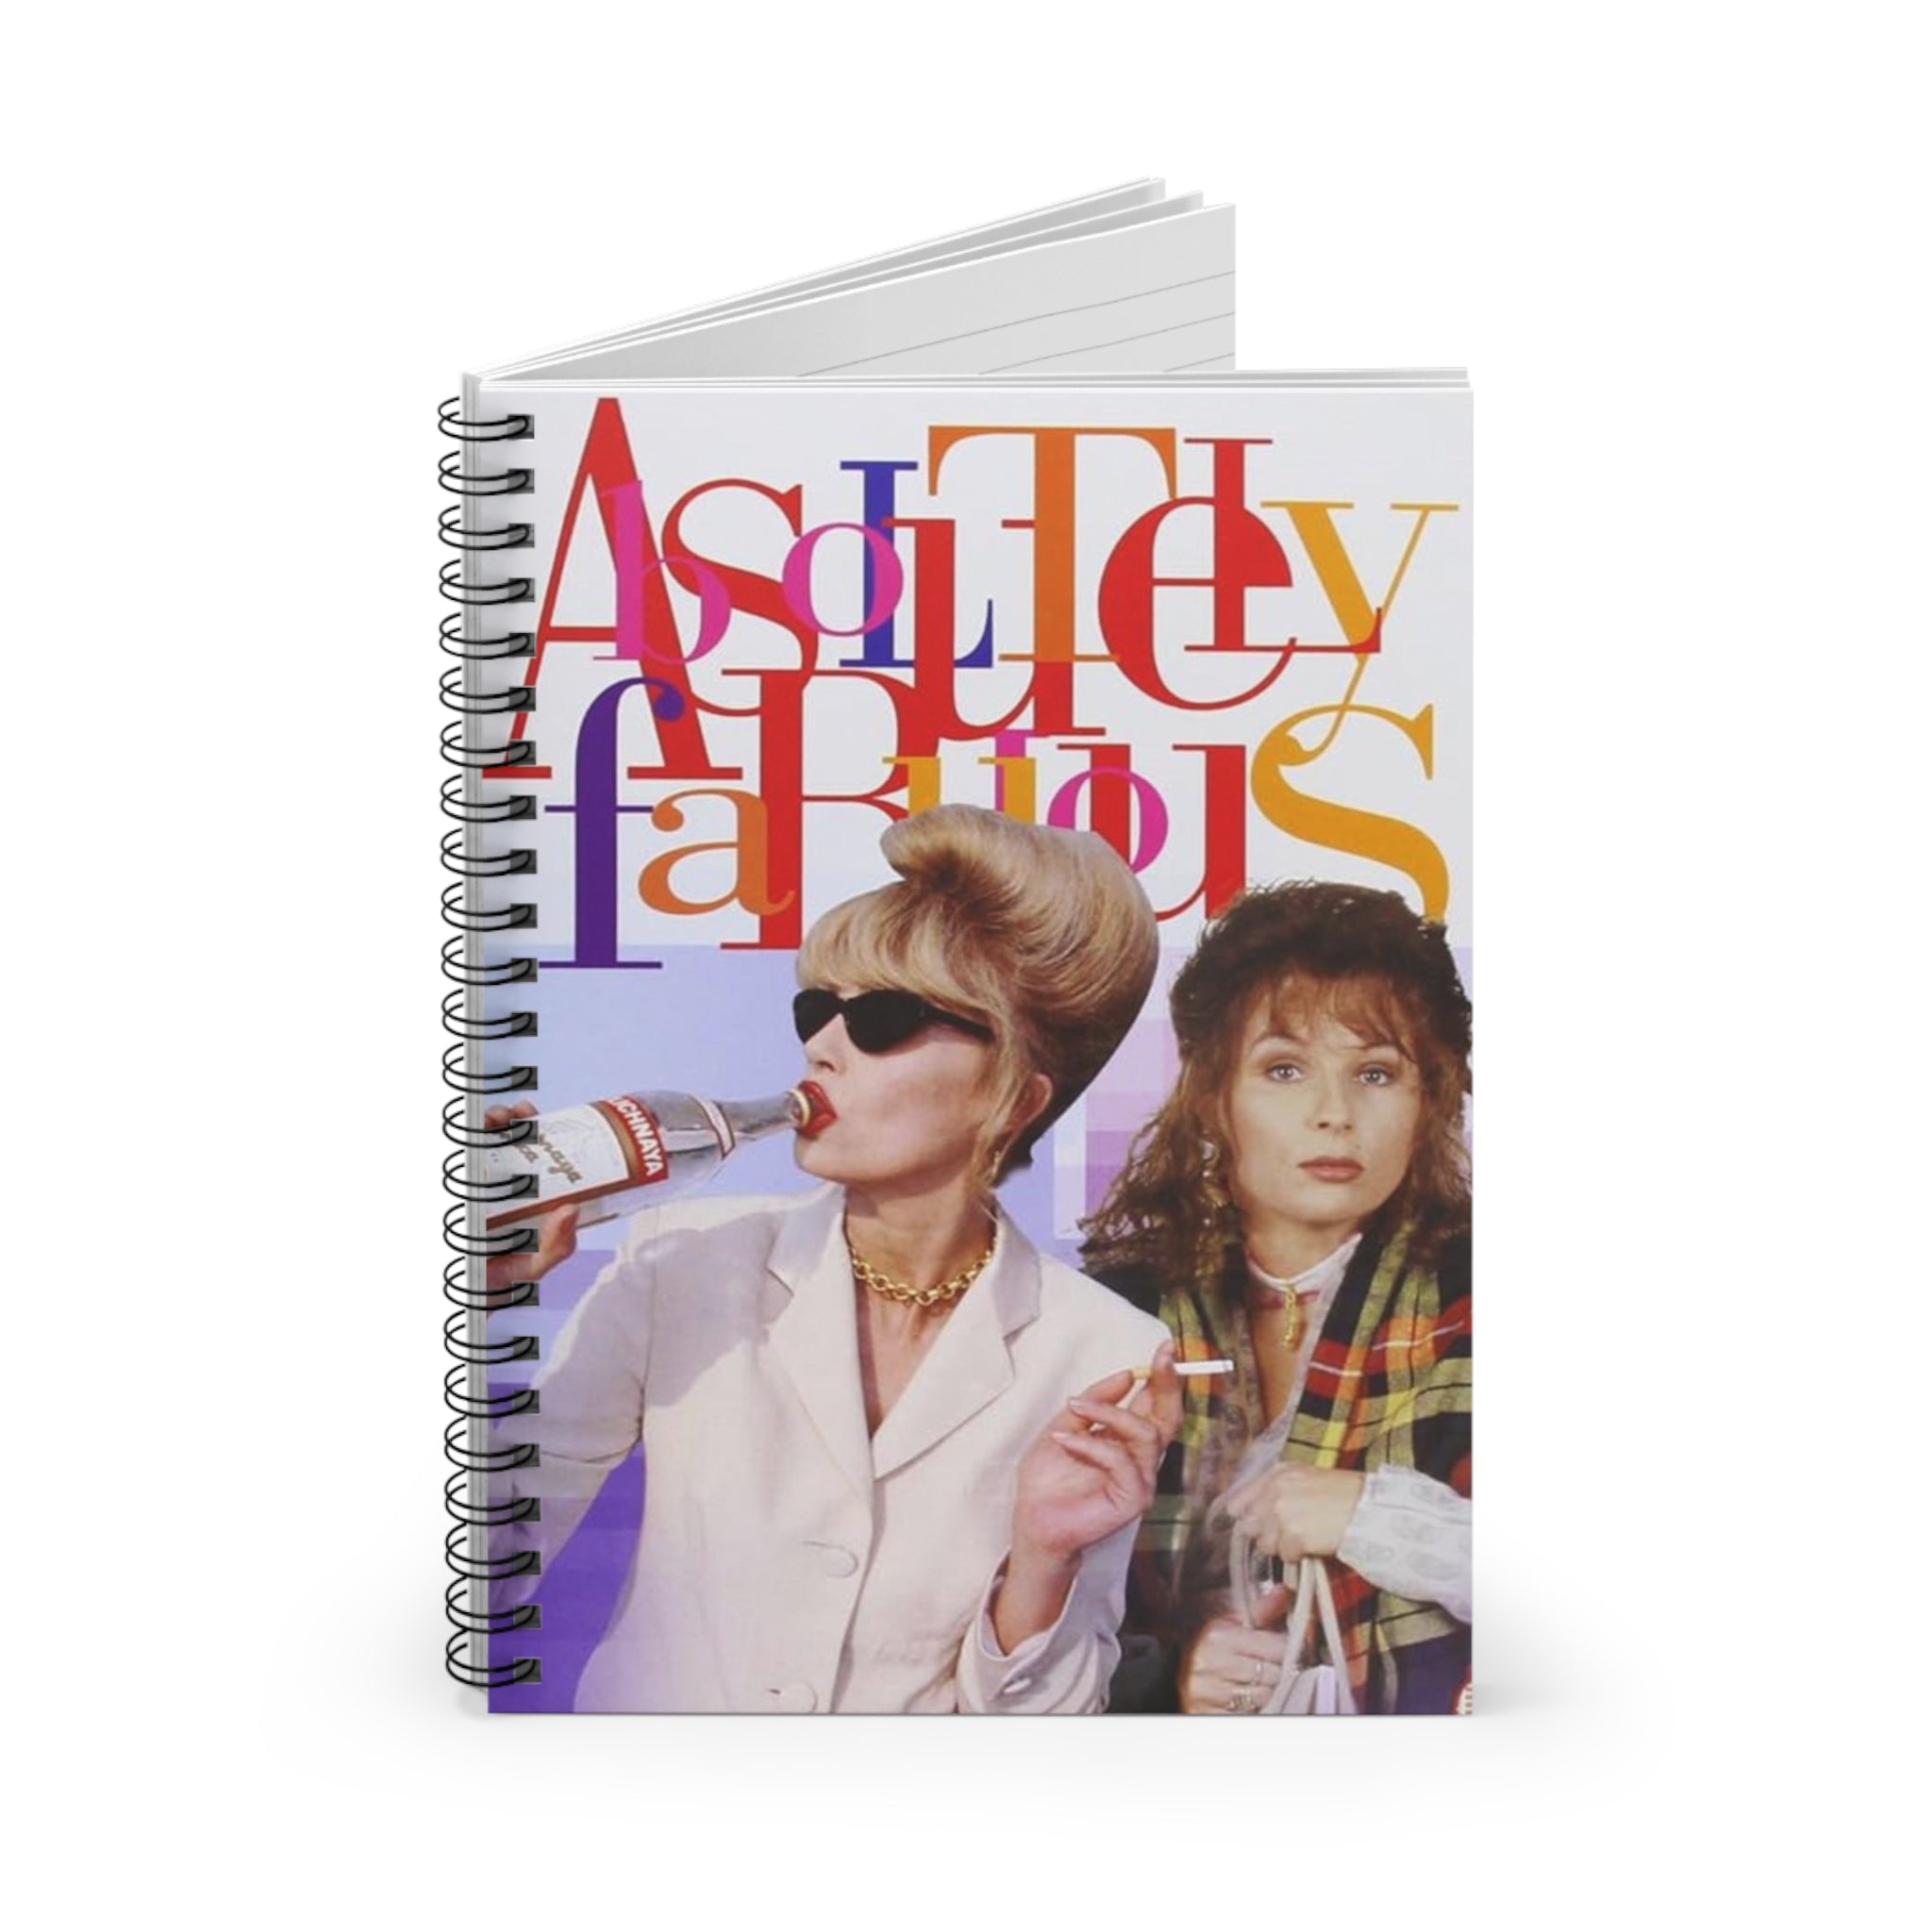 https://creationsbychrisandcarlos.store/products/absolutely-fabulous-spiral-notebook-ruled-line